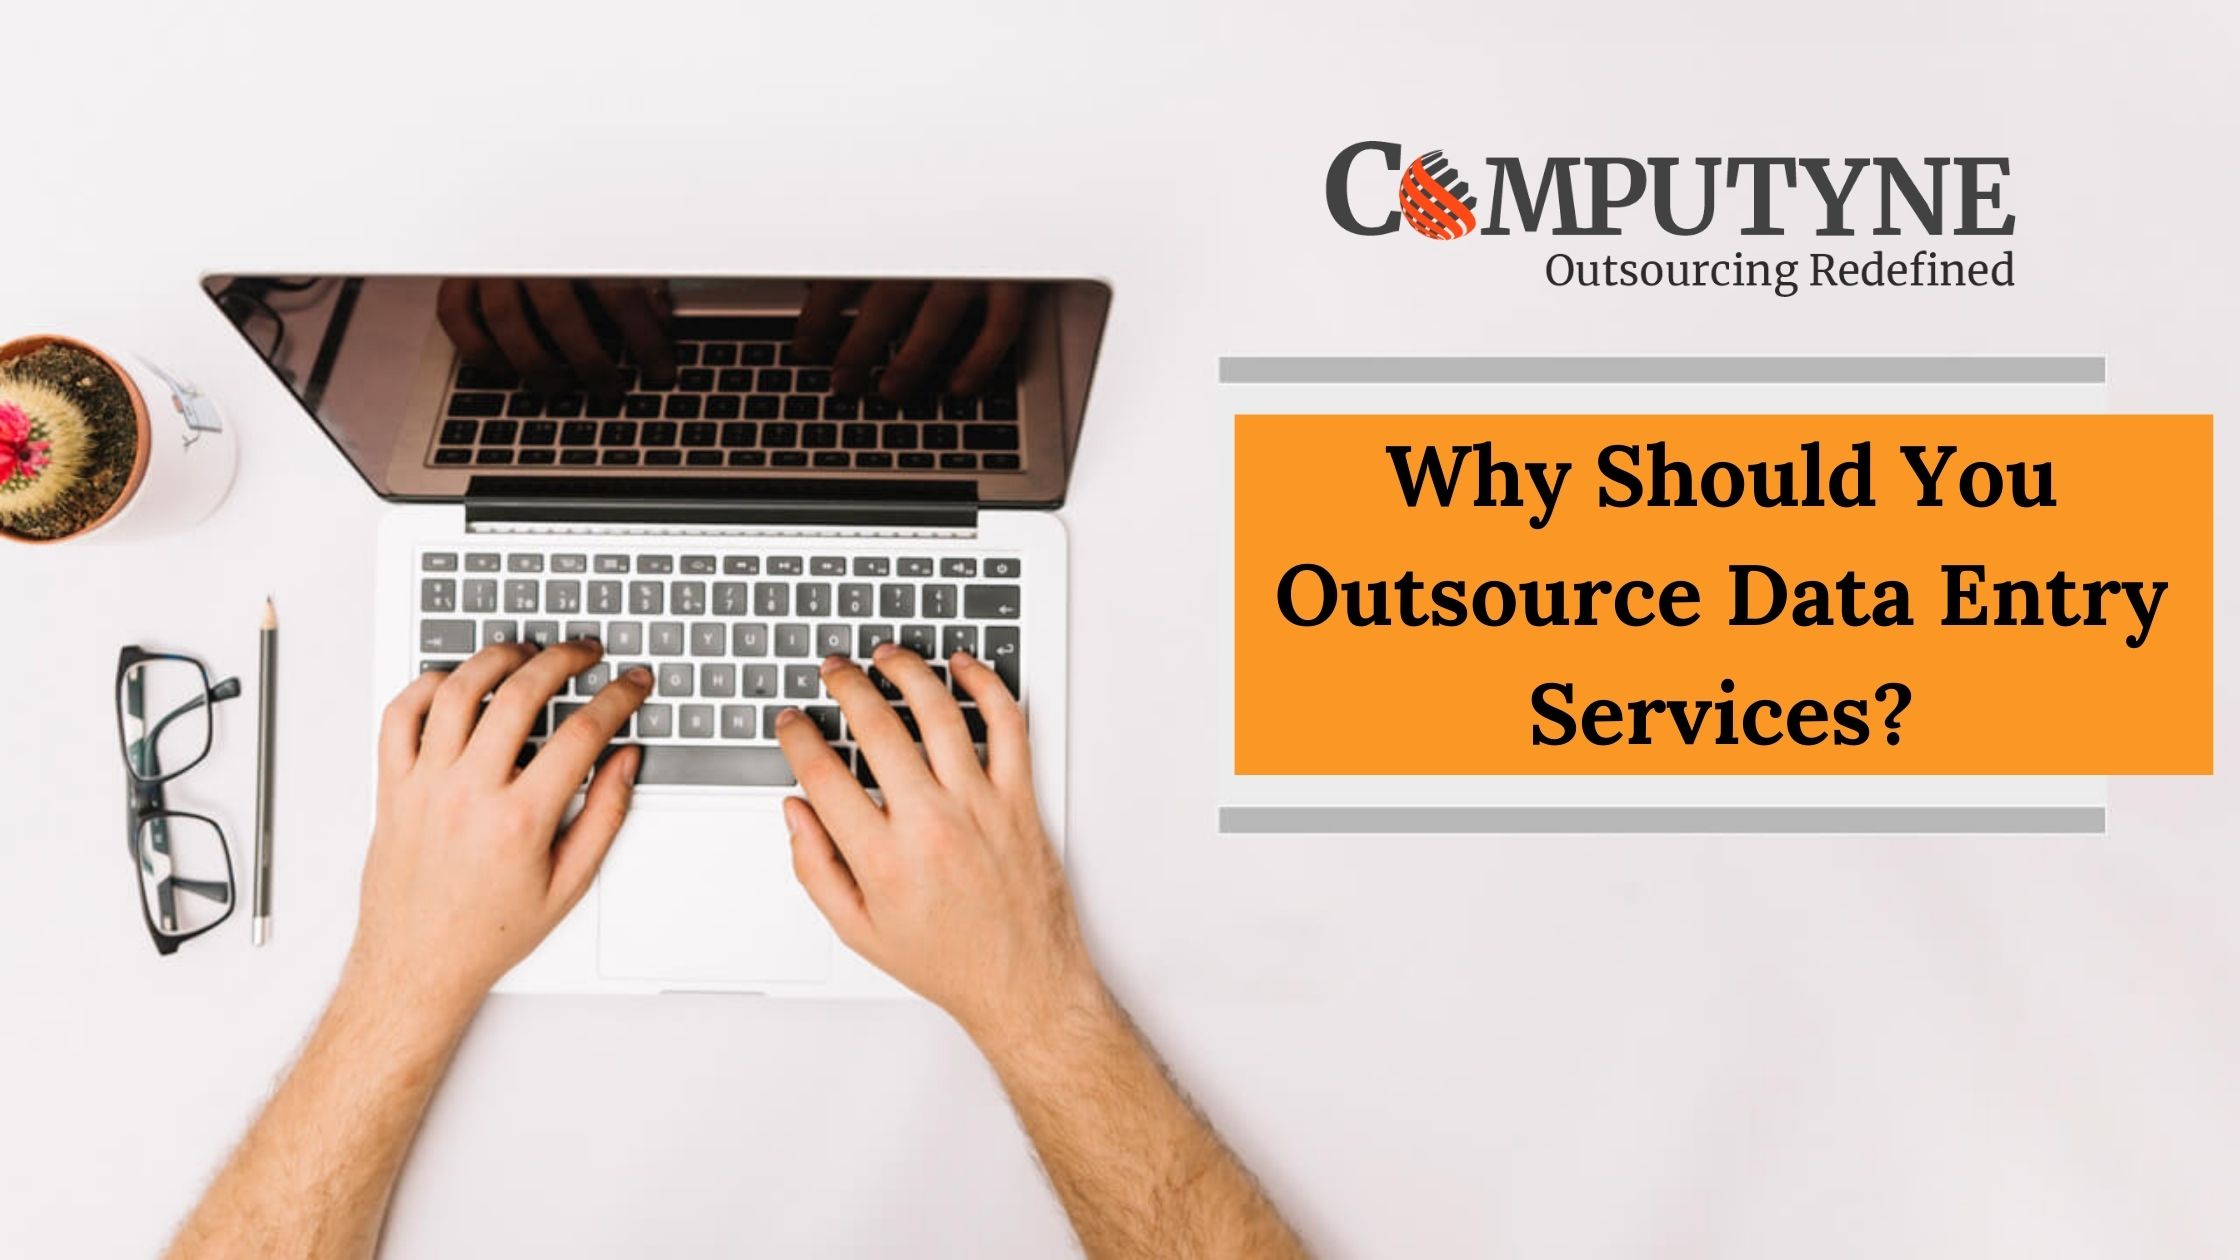 Why Should You Outsource Data Entry Services?